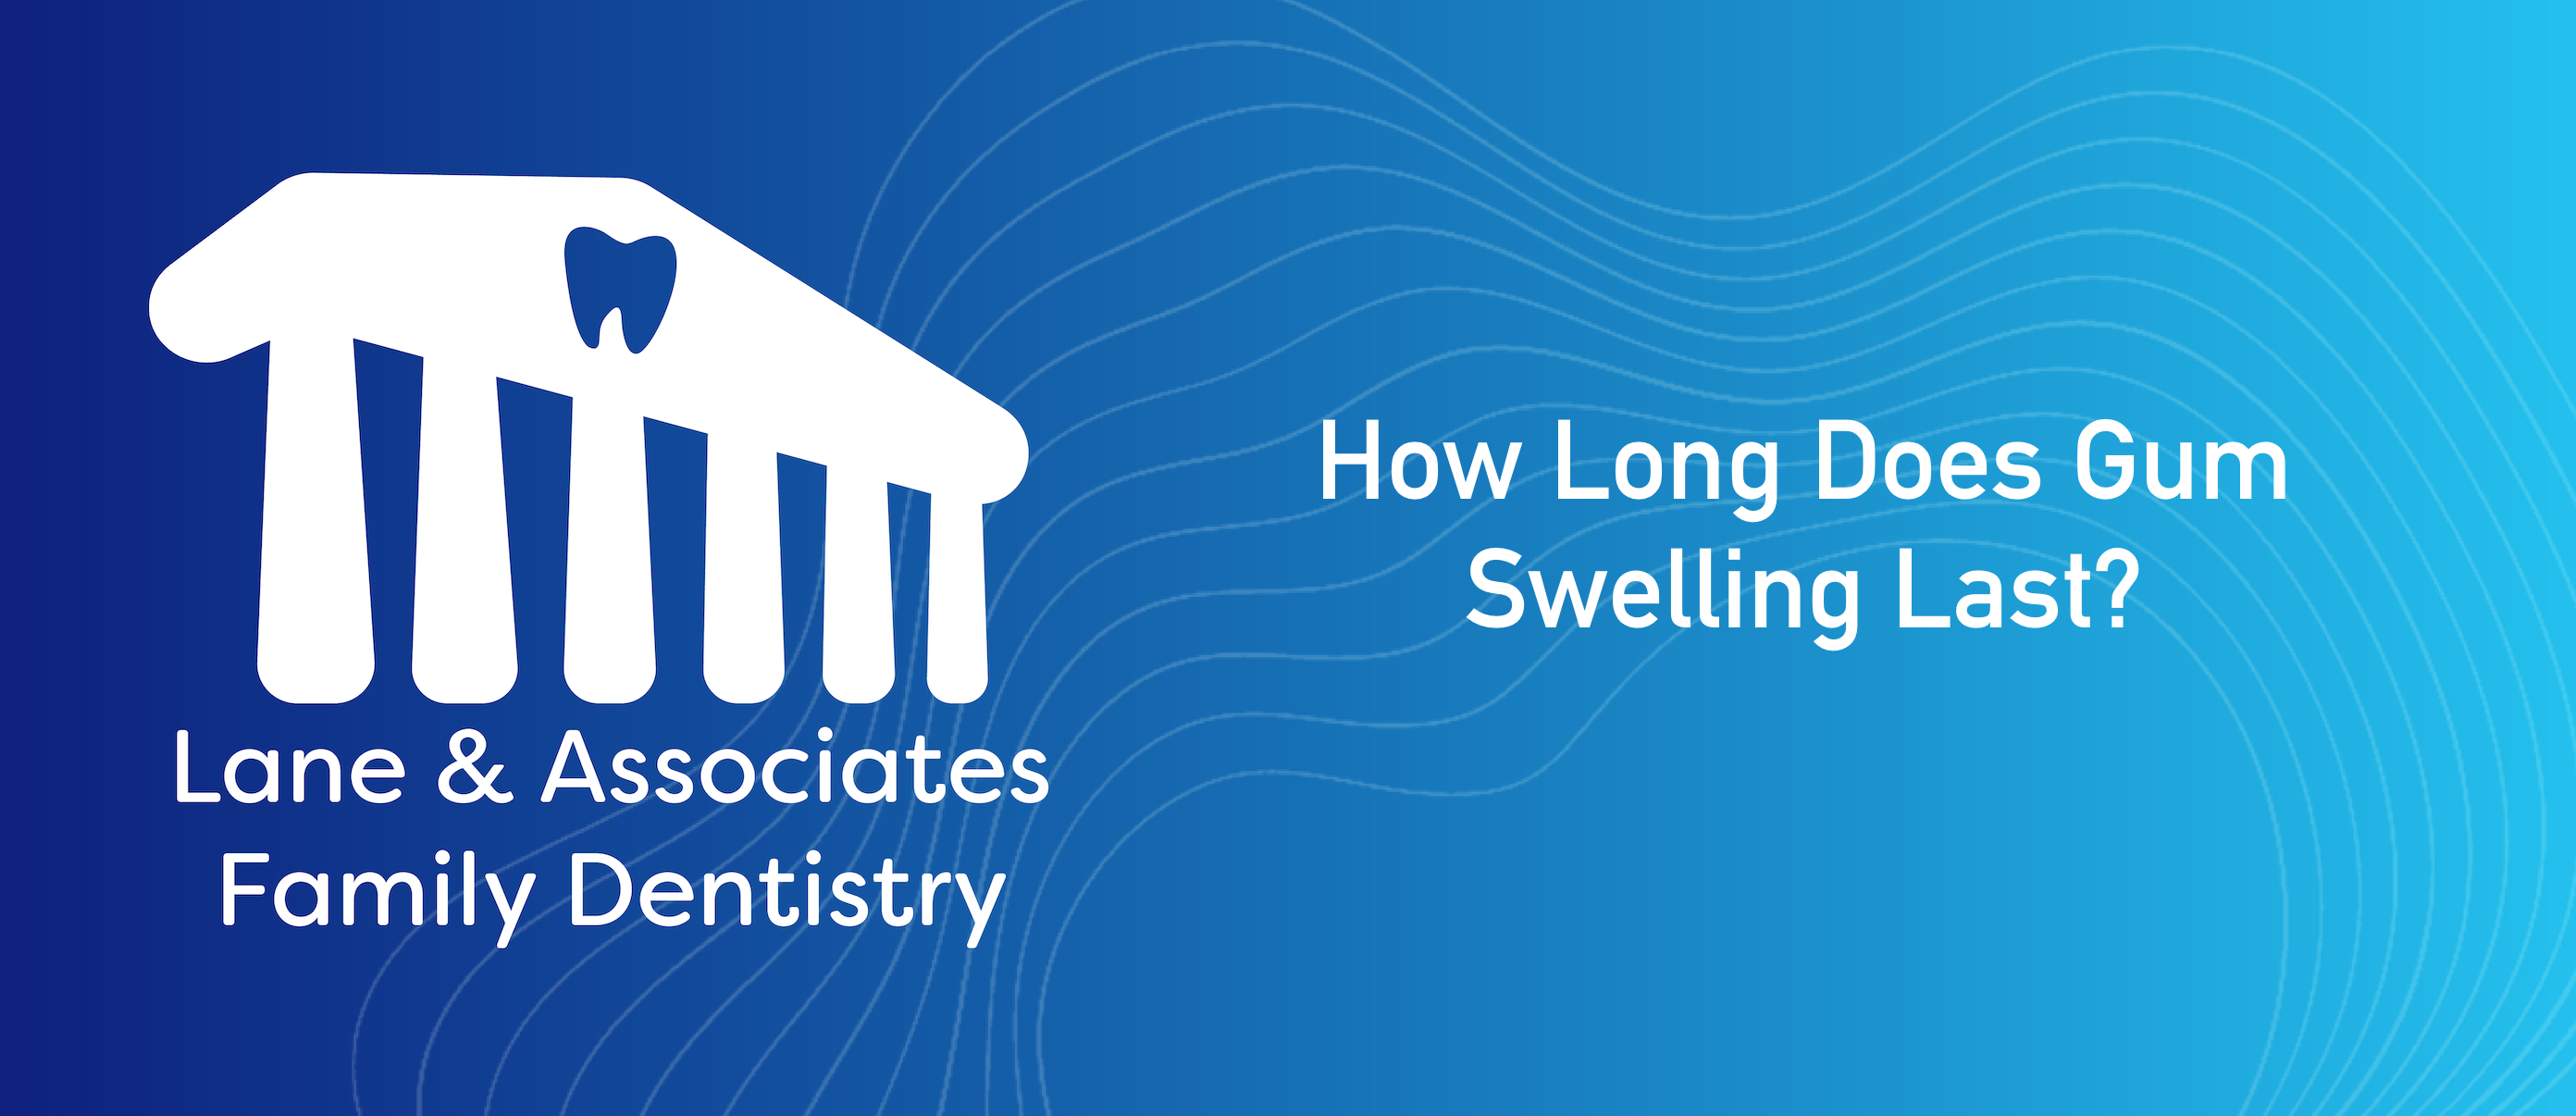 How Long Does Gum Swelling Last?